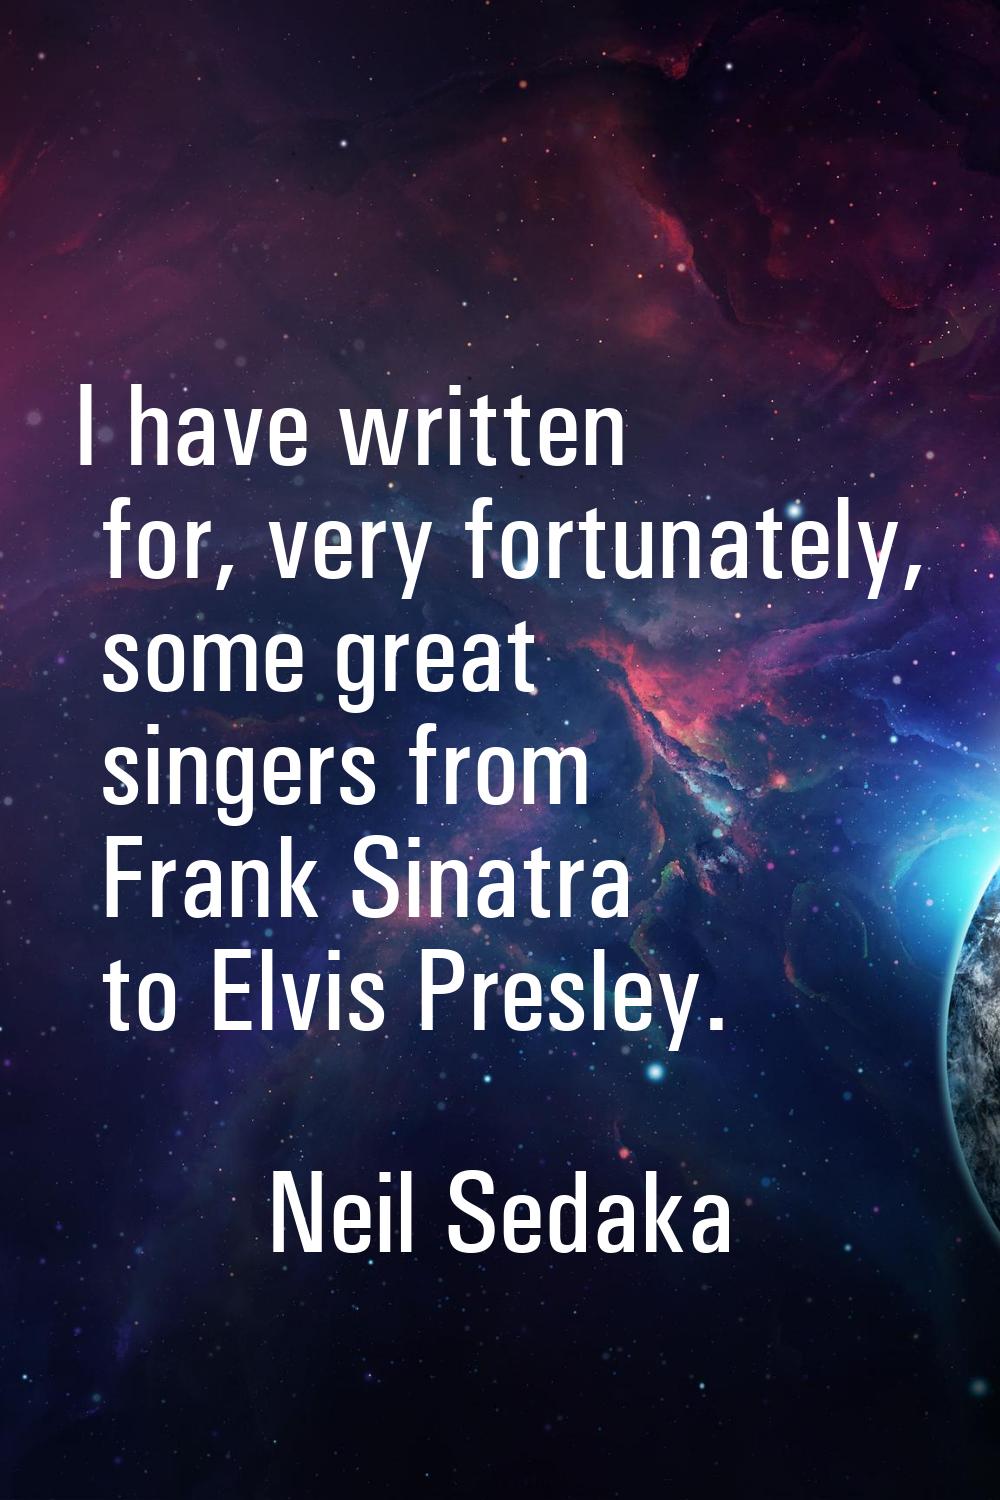 I have written for, very fortunately, some great singers from Frank Sinatra to Elvis Presley.